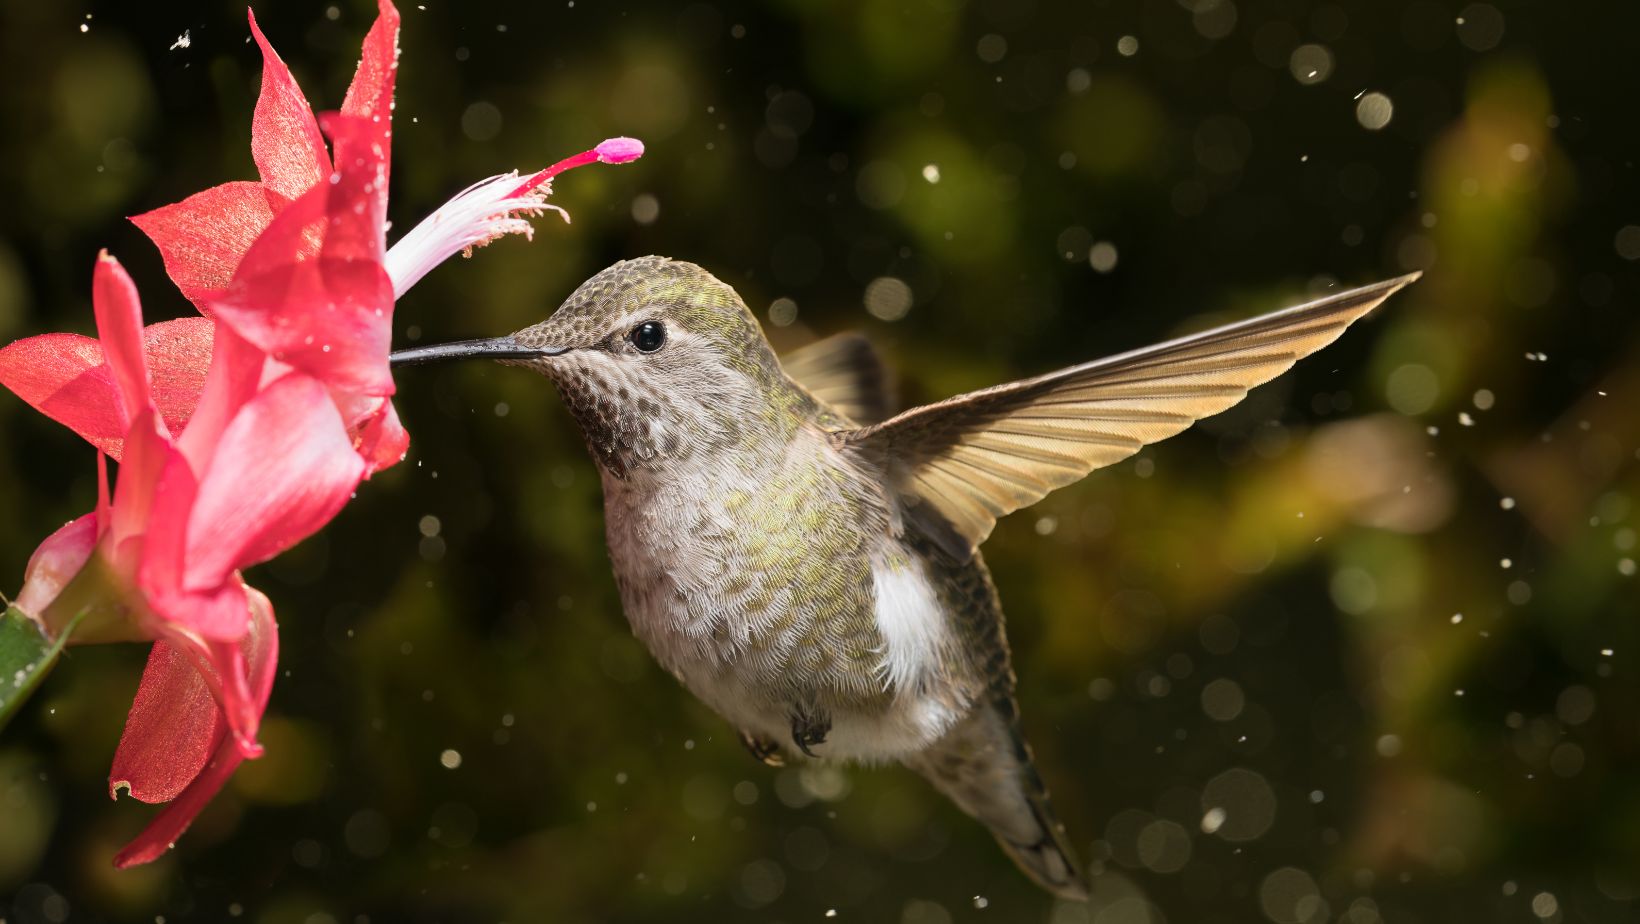 what does it mean spiritually when a hummingbird visits you